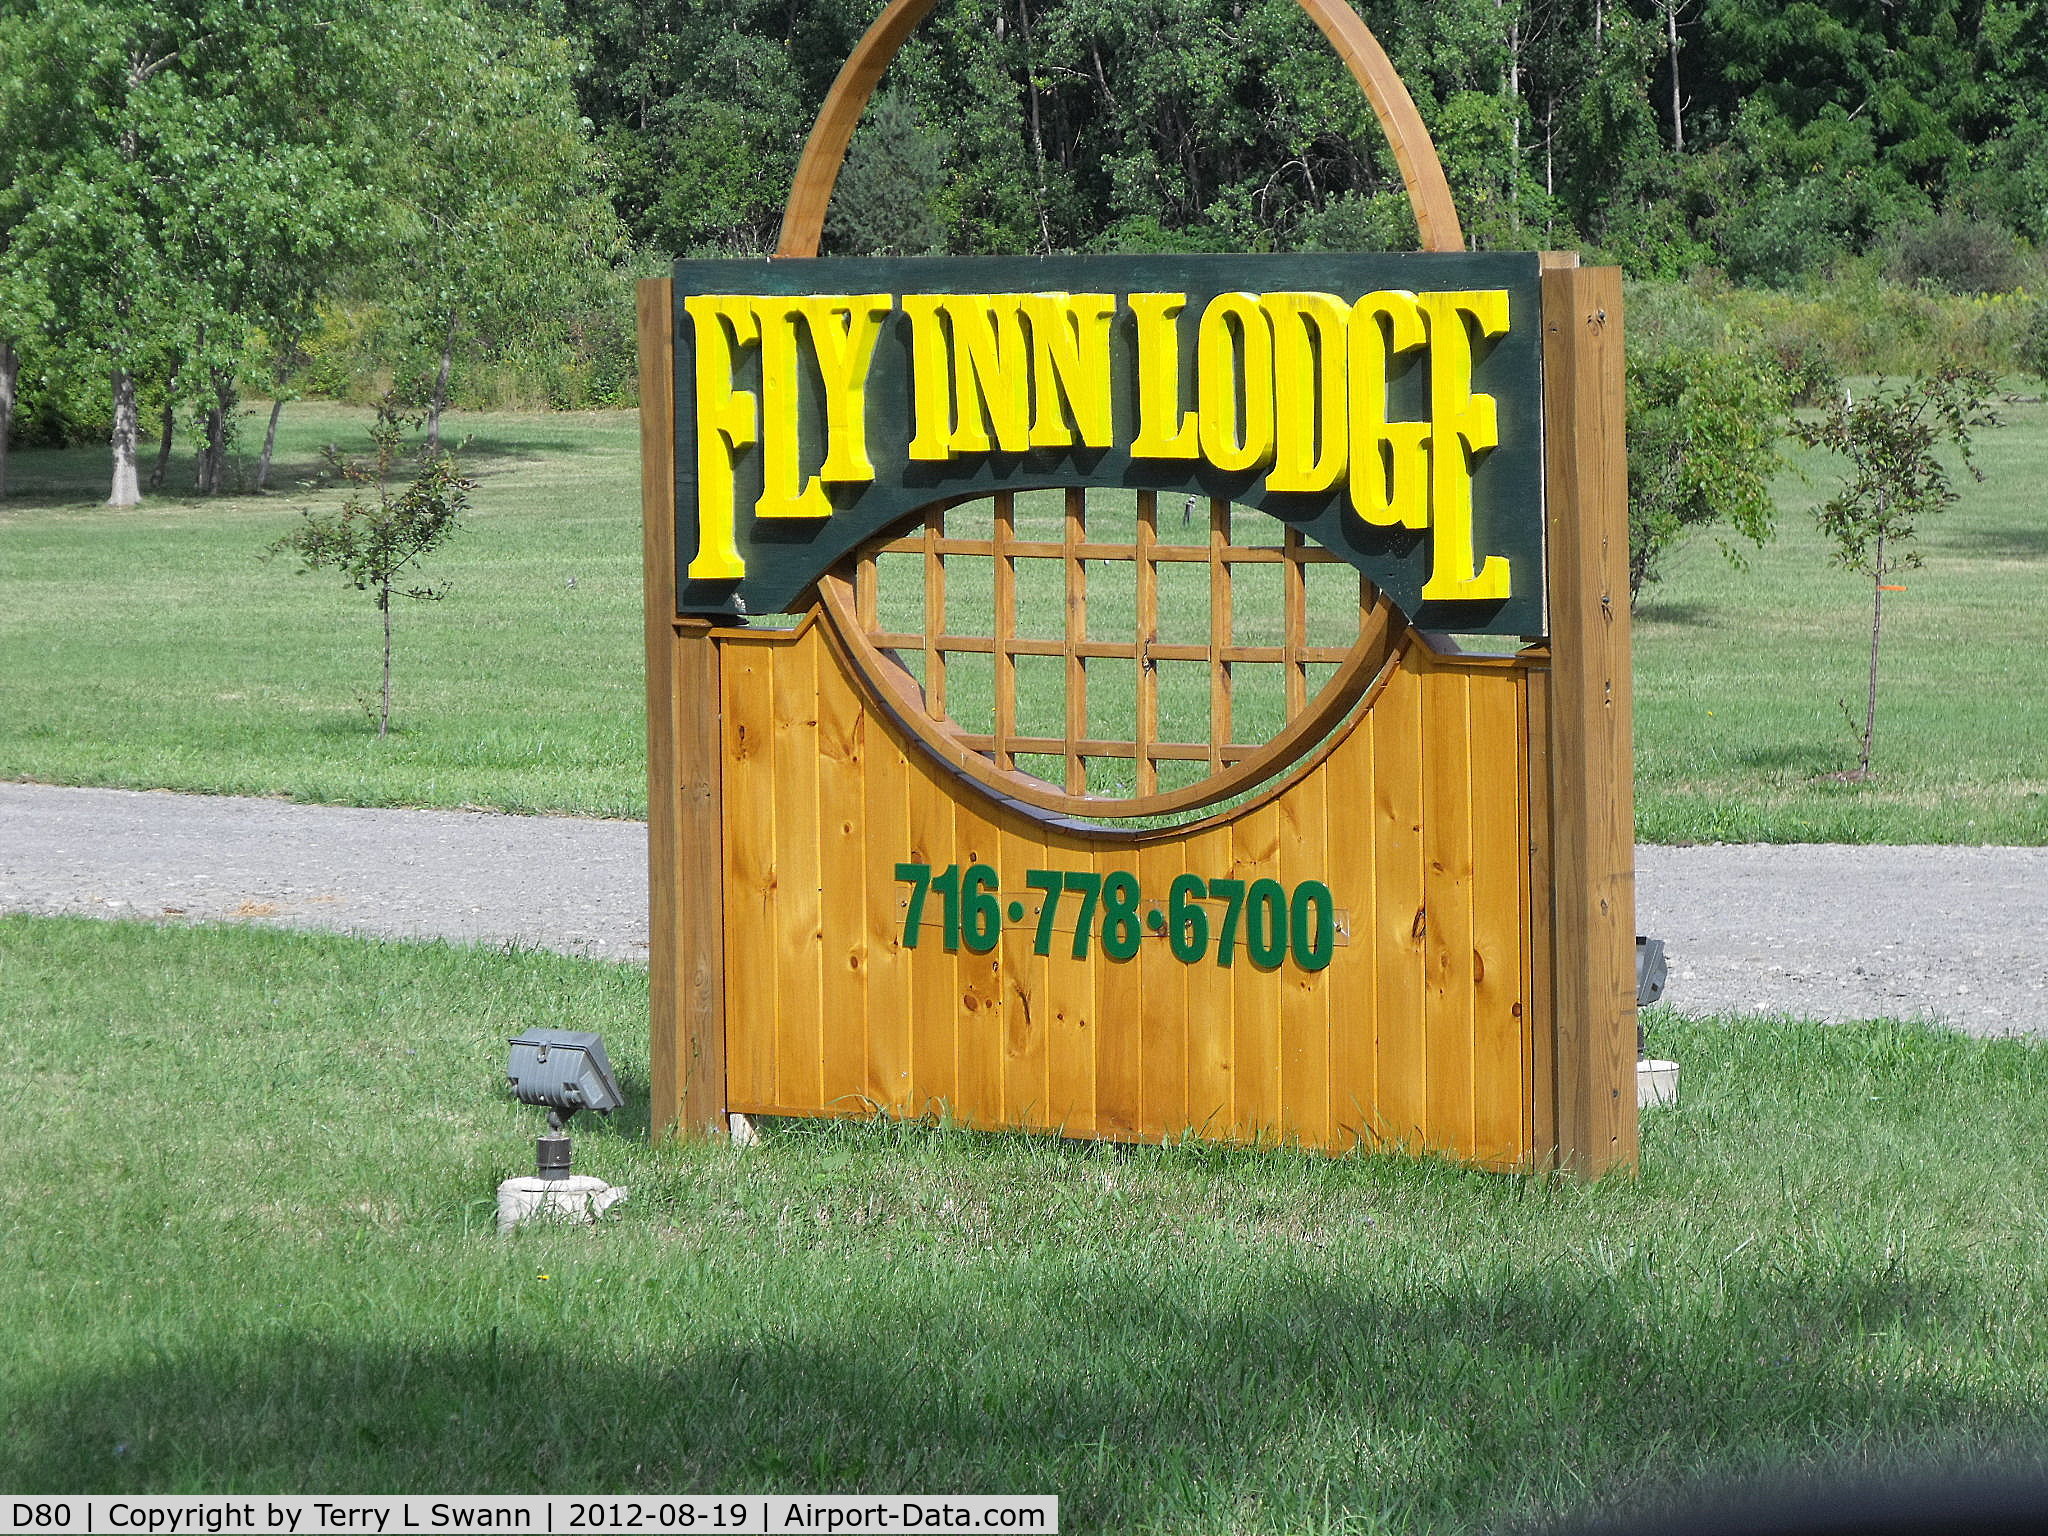 Olcott-newfane Airport (D80) - New sign at the airport.